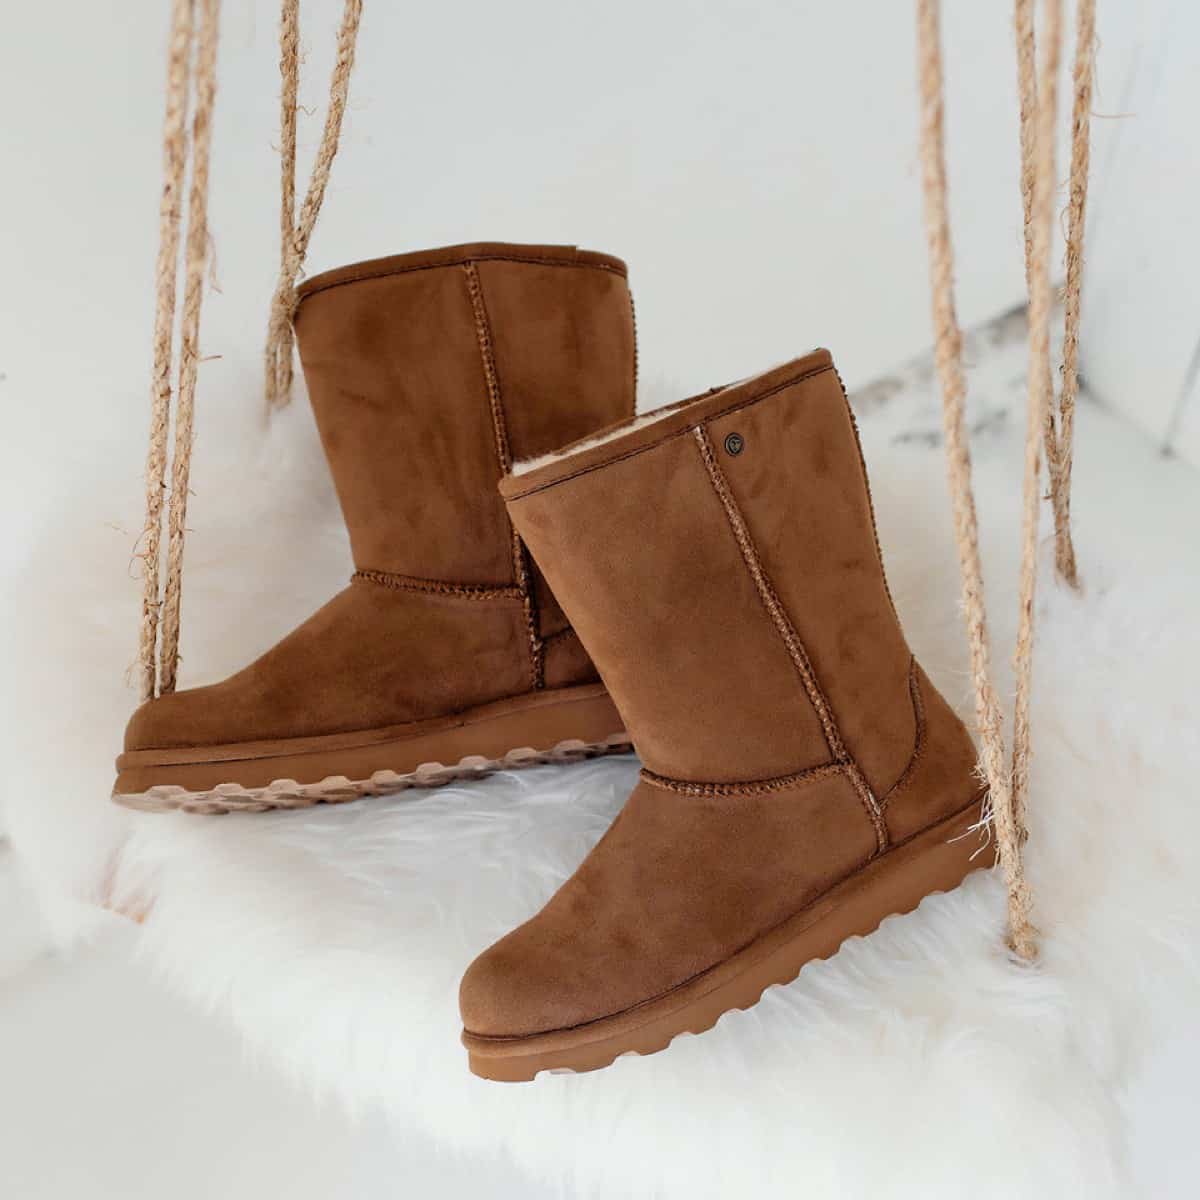 brown vegan leather free uggs from bearpaw brand